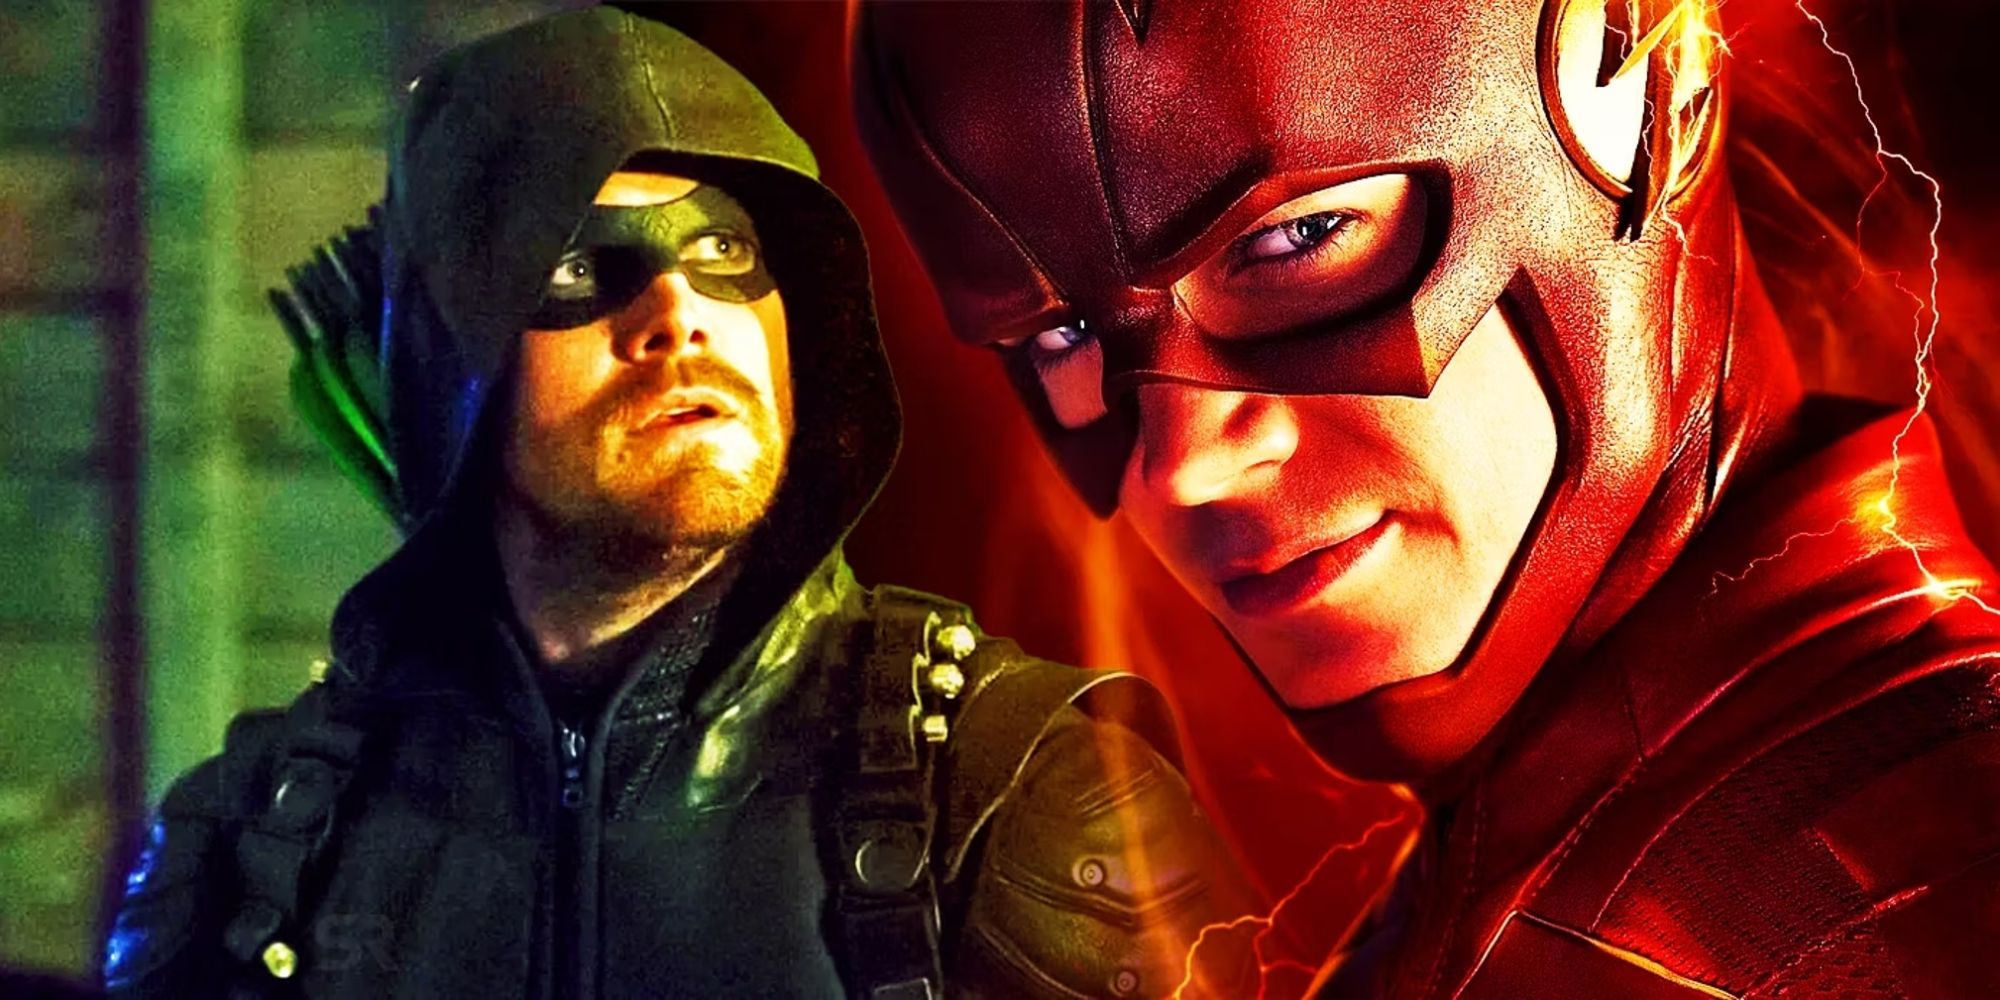 Stephen Amell's Green Arrow and Grant Gustin's Barry Allen